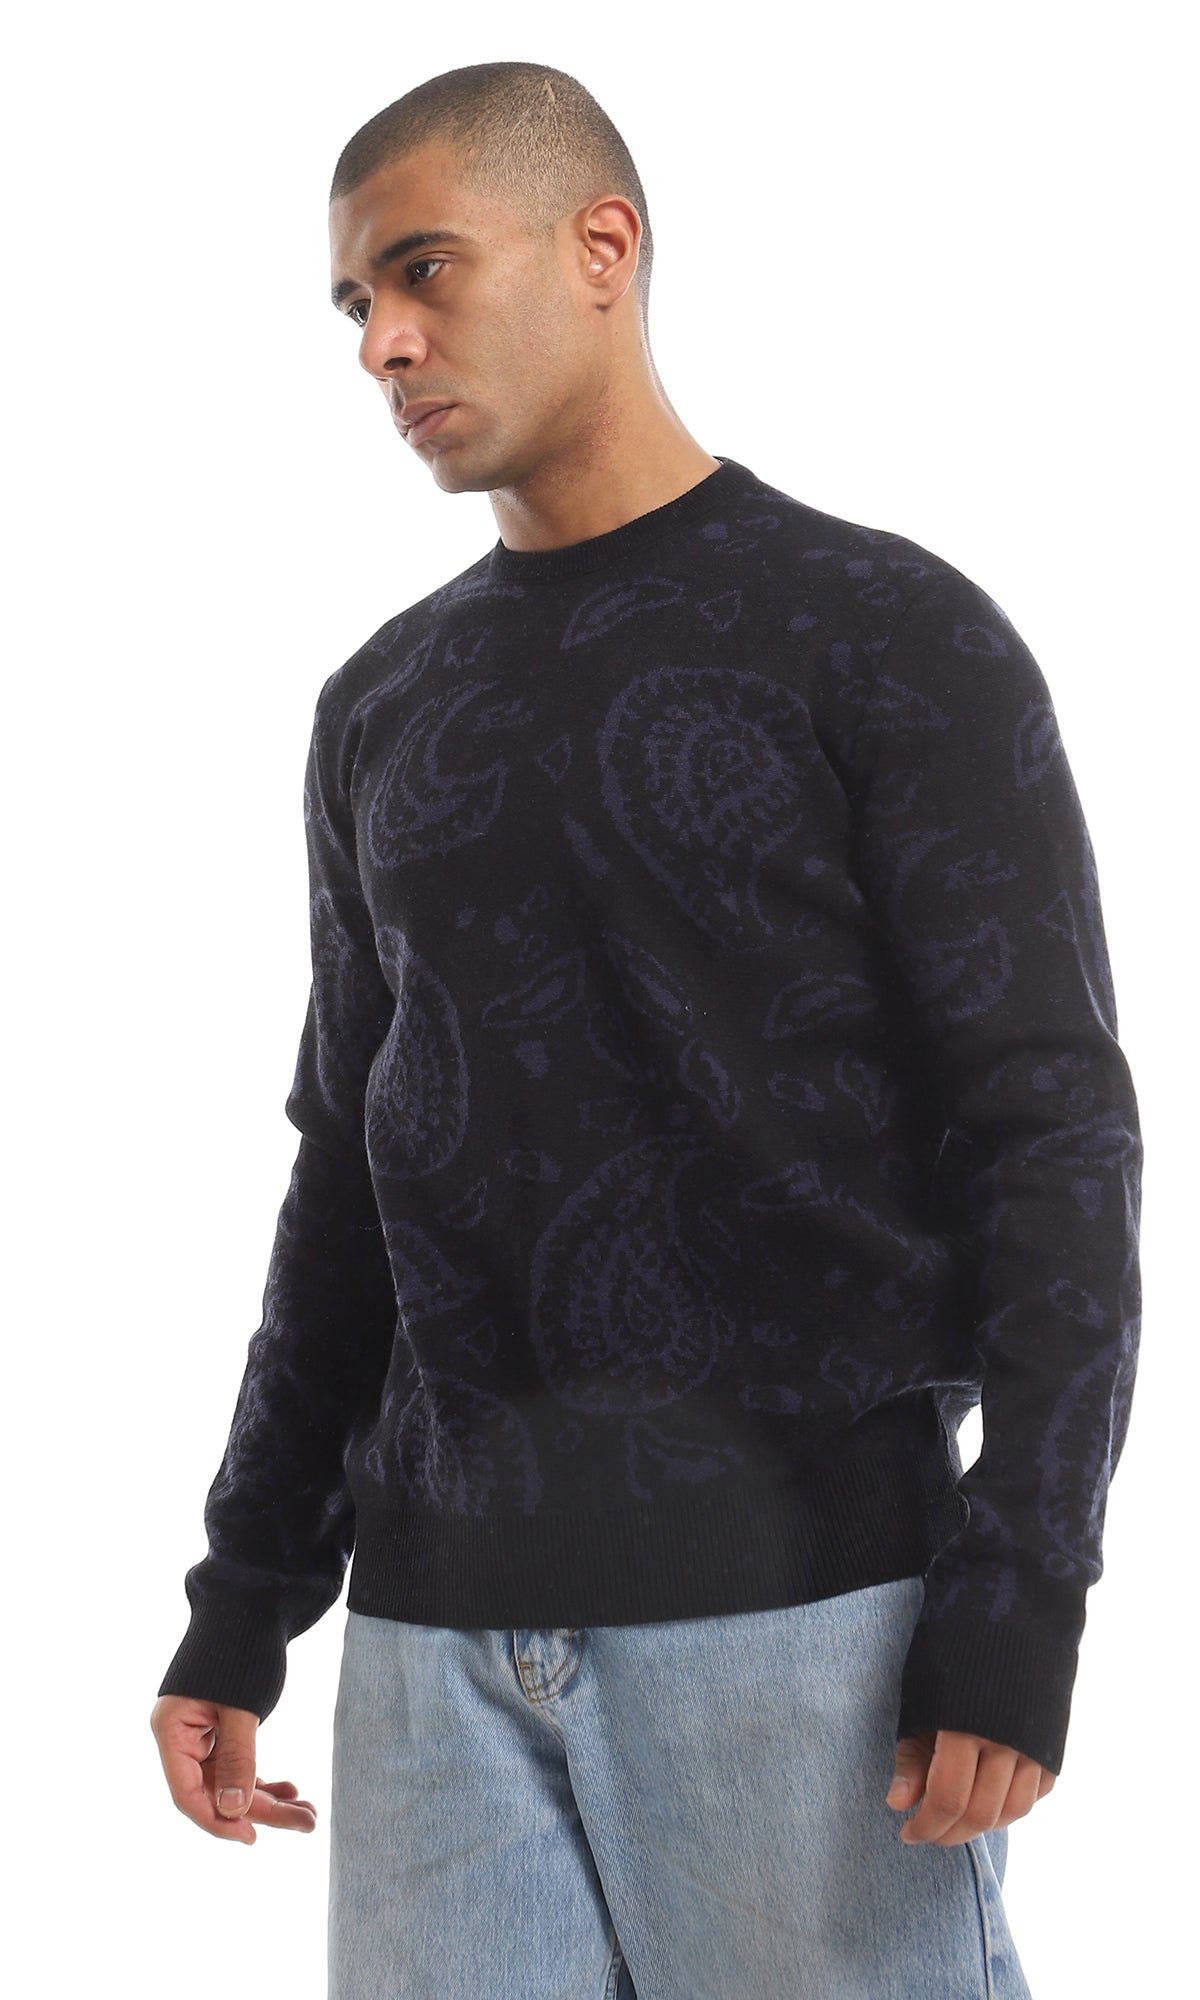 O161088 Cozy Patterned Round Neck Pullover - Black